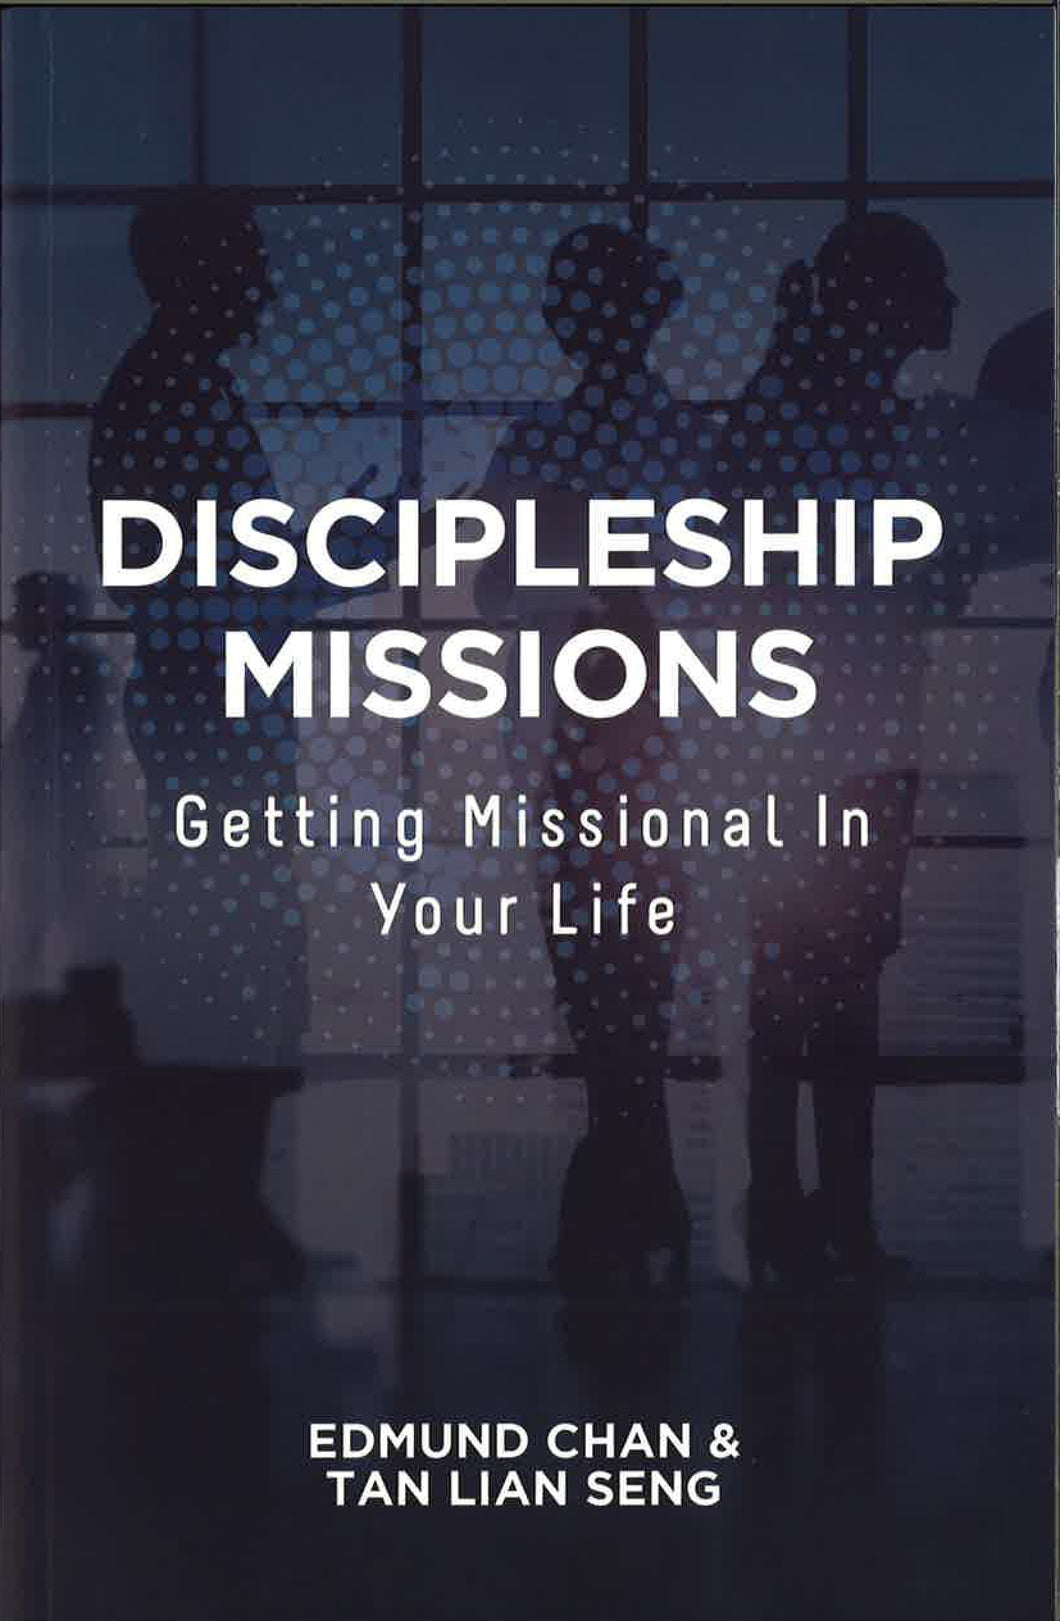 DISCIPLESHIP MISSIONS - GETTING MISSIONAL IN YOUR LIFE